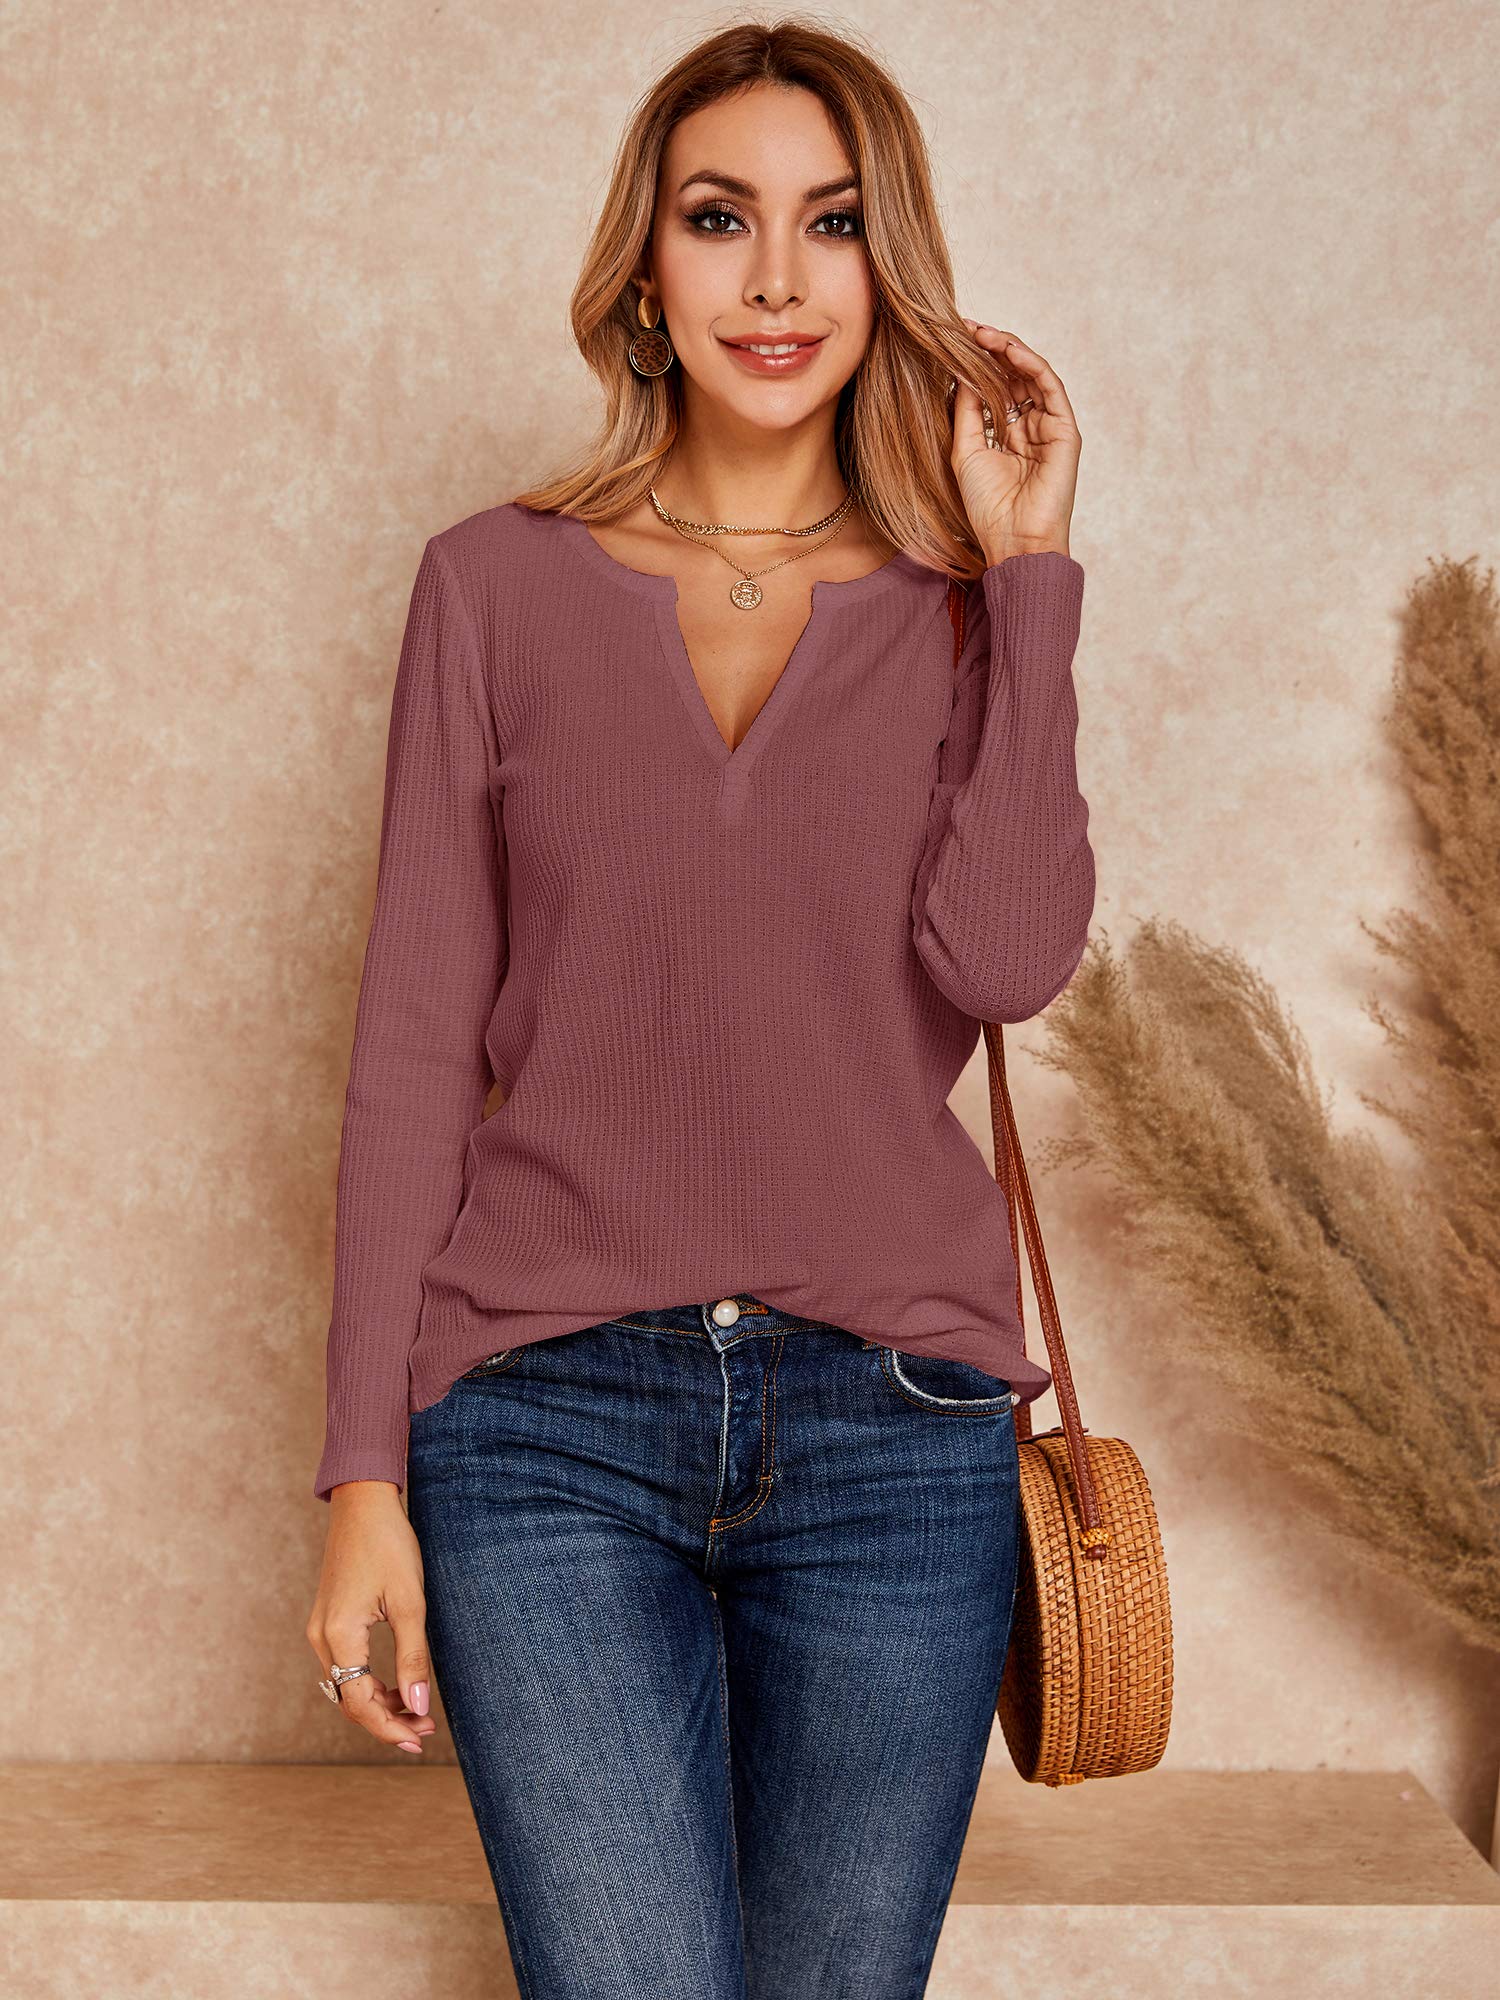 Womens V Neck Waffle Knit Shirts Long Sleeve Loose Fitting Warm Tee Tops Sweaters Pullovers